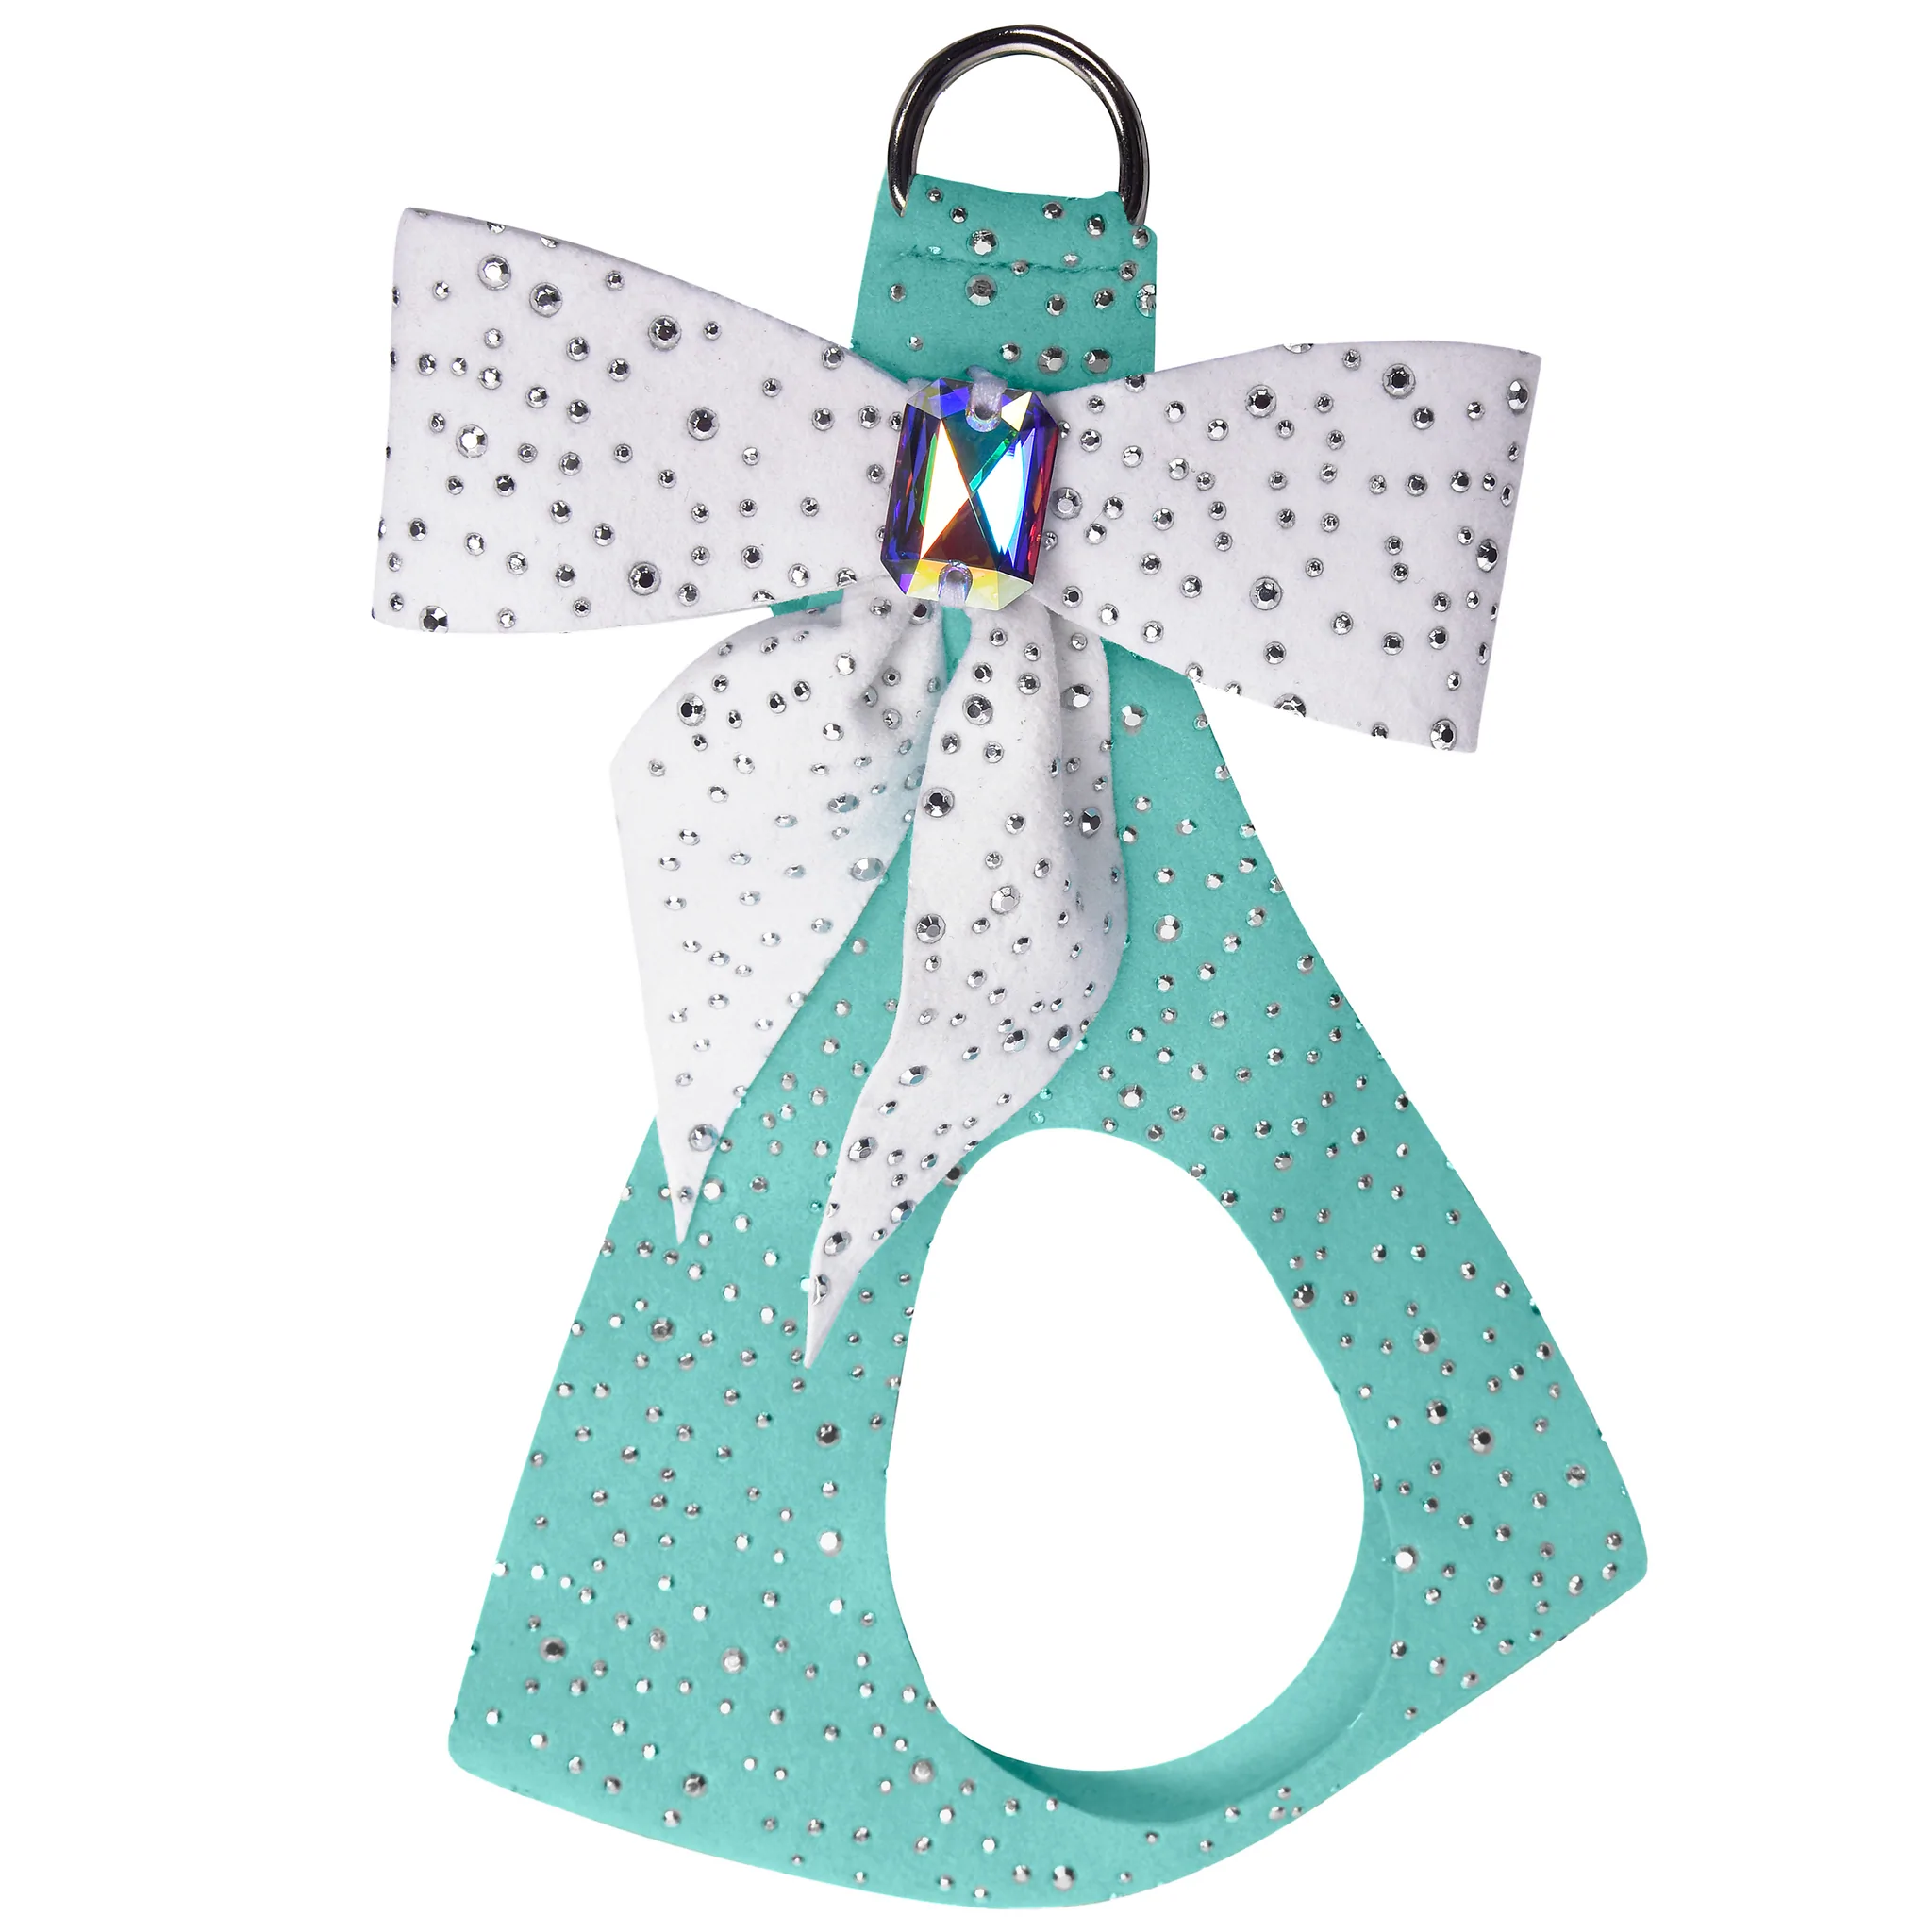 Premium Quality, Hand-Crafted, Preppy Puppy, Tiffi's Gift Step In Harness, Made in America